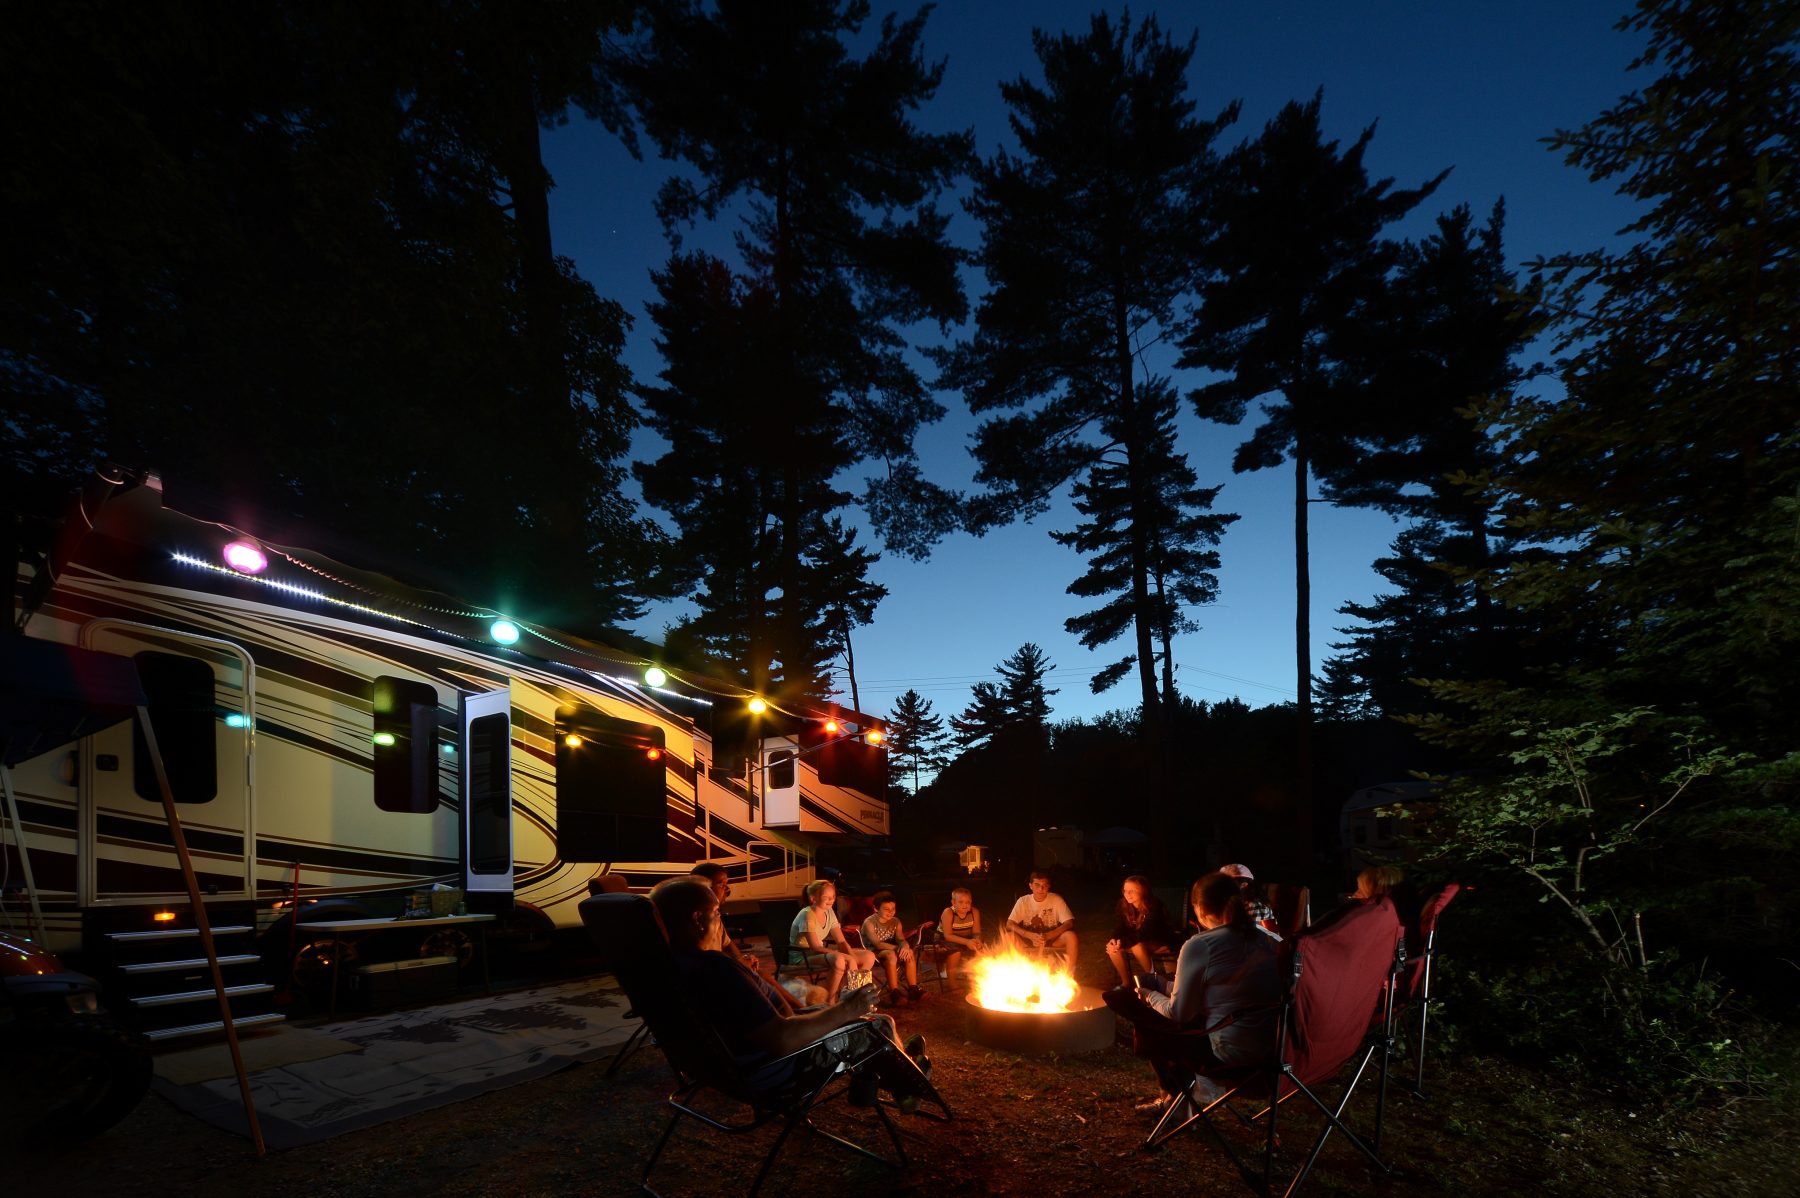 family sitting by campfire in front of RV at sunset under trees